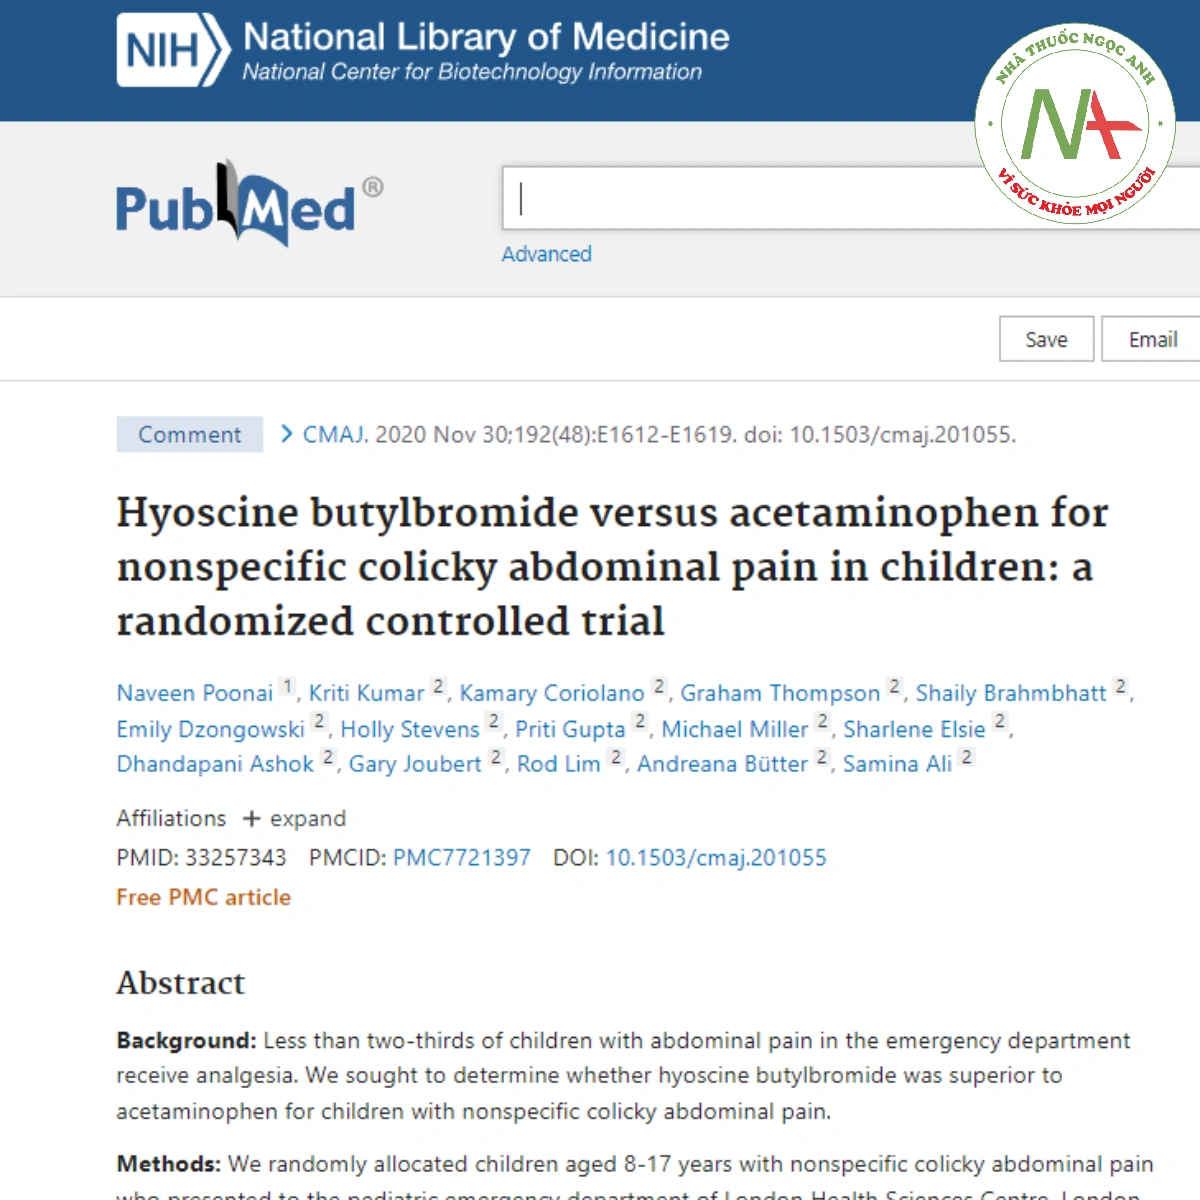 Hyoscine butylbromide versus acetaminophen for nonspecific colicky abdominal pain in children_ a randomized controlled trial